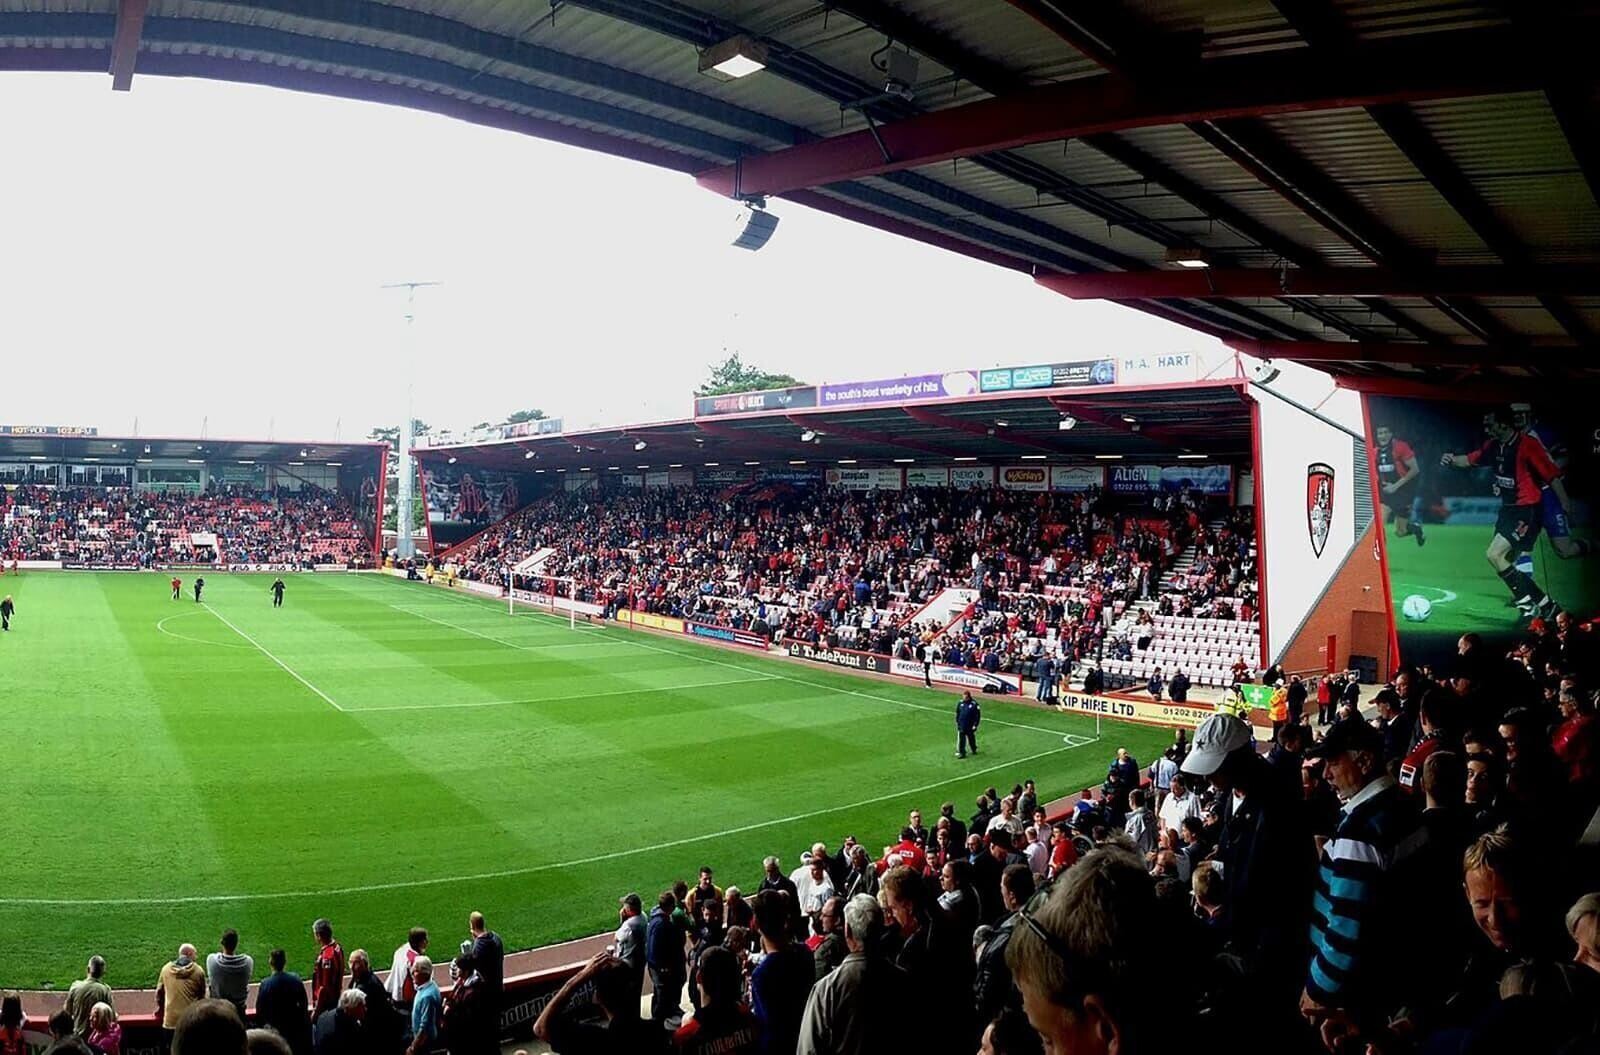 Formerly known as Dean Court, Bournemouth's football Stadium is now known as the Vitality